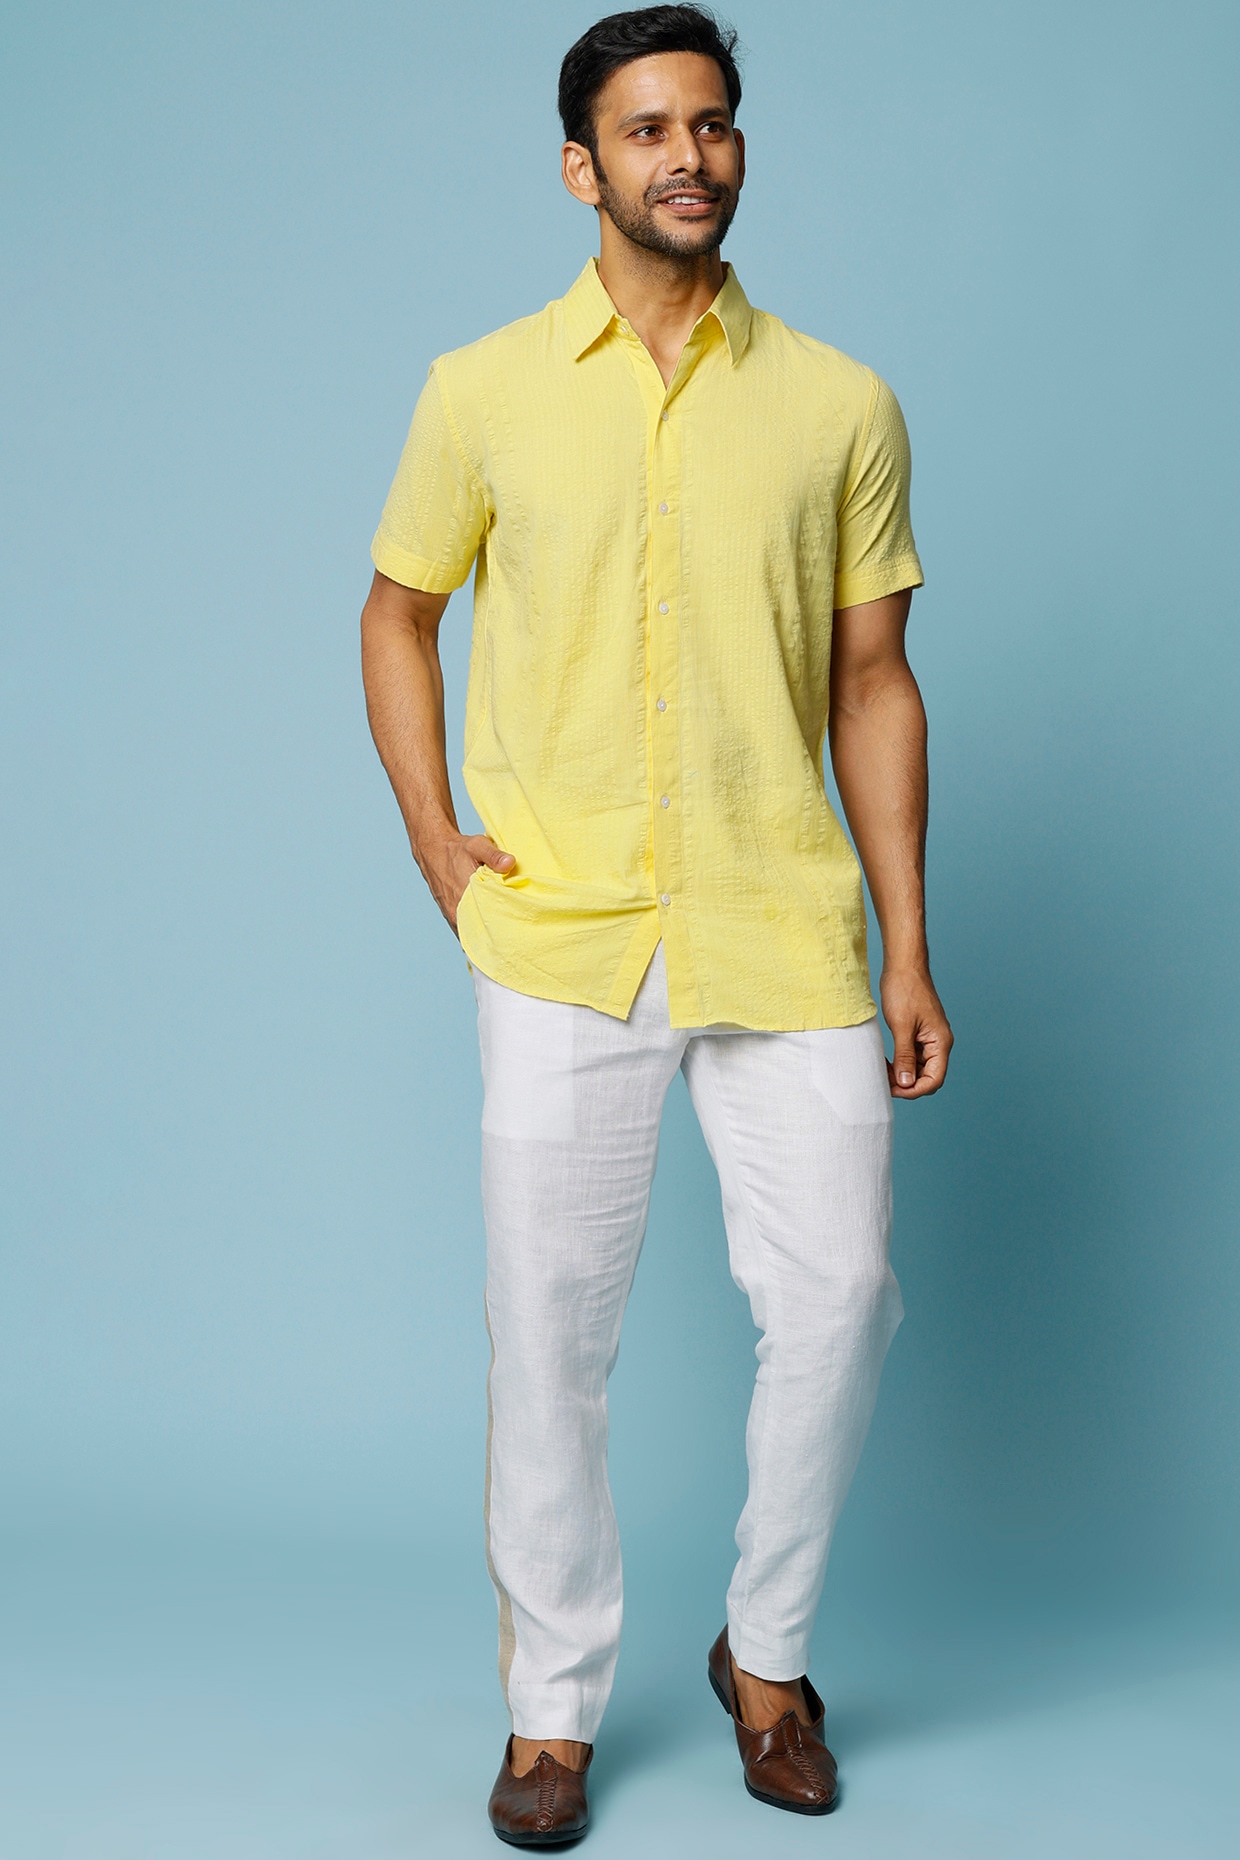 Dapper Mustard Yellow Shirt and White Pants Outfit  Best Fashion Blog For  Men  TheUnstitchdcom